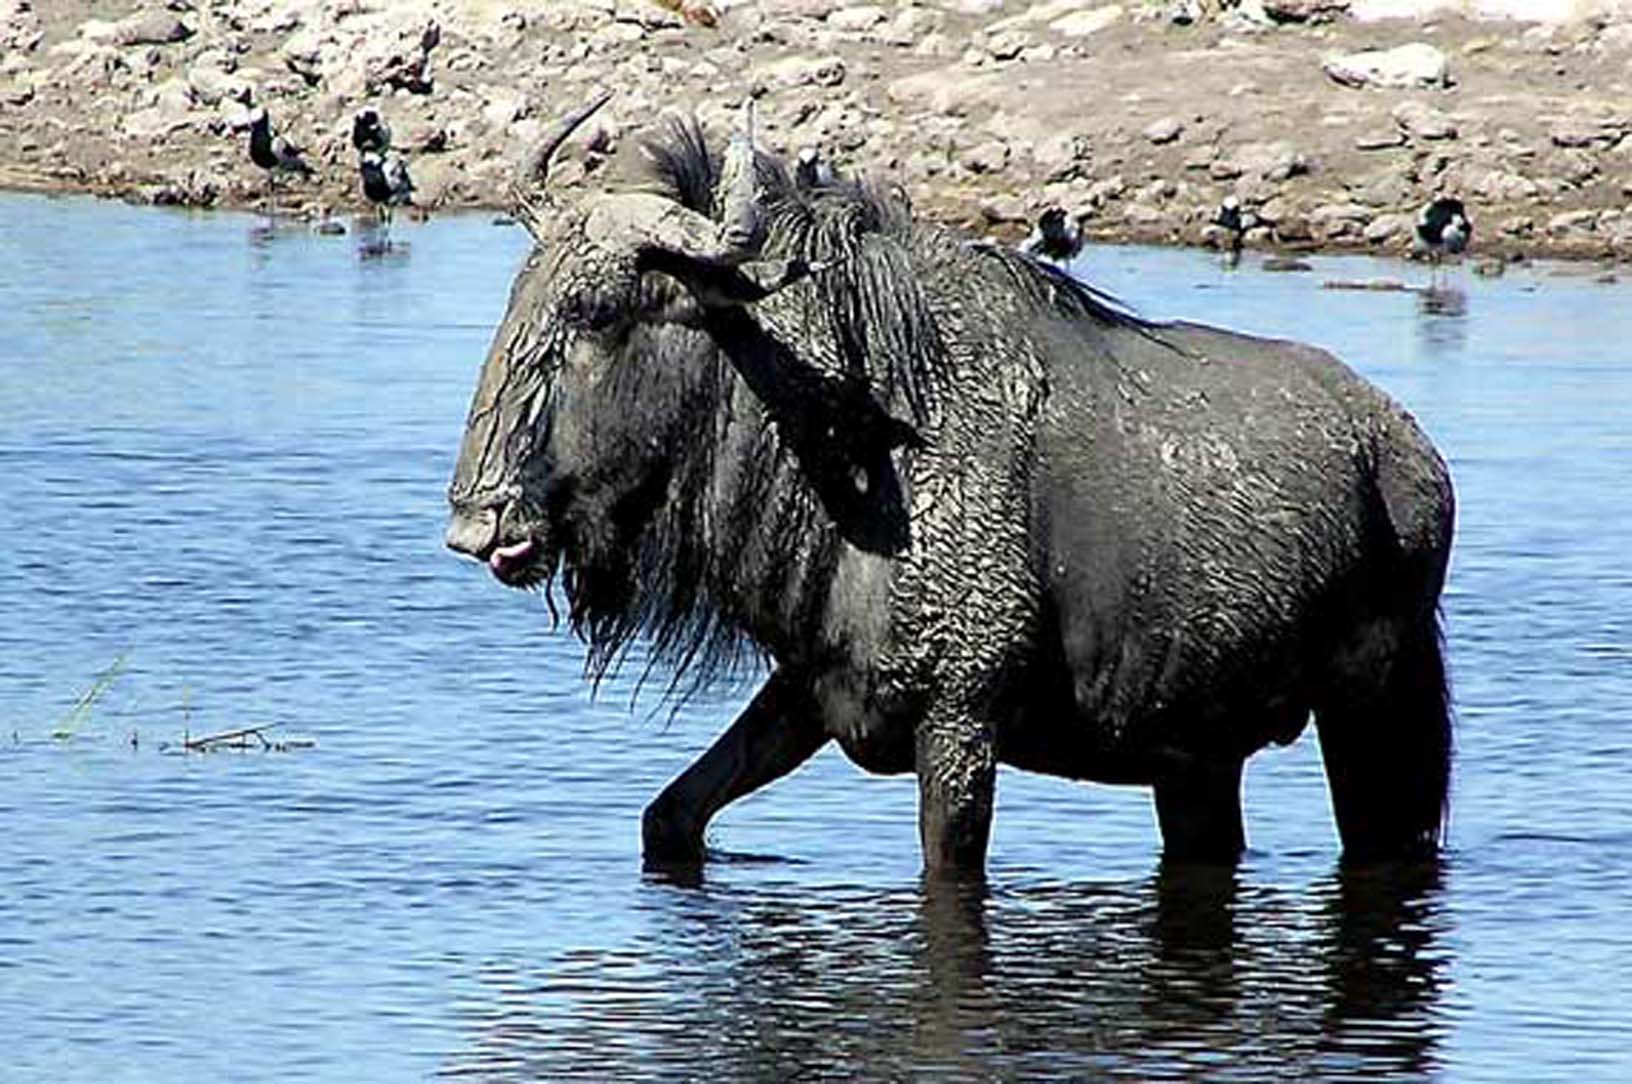 The "Ugly Five": Wildebeest